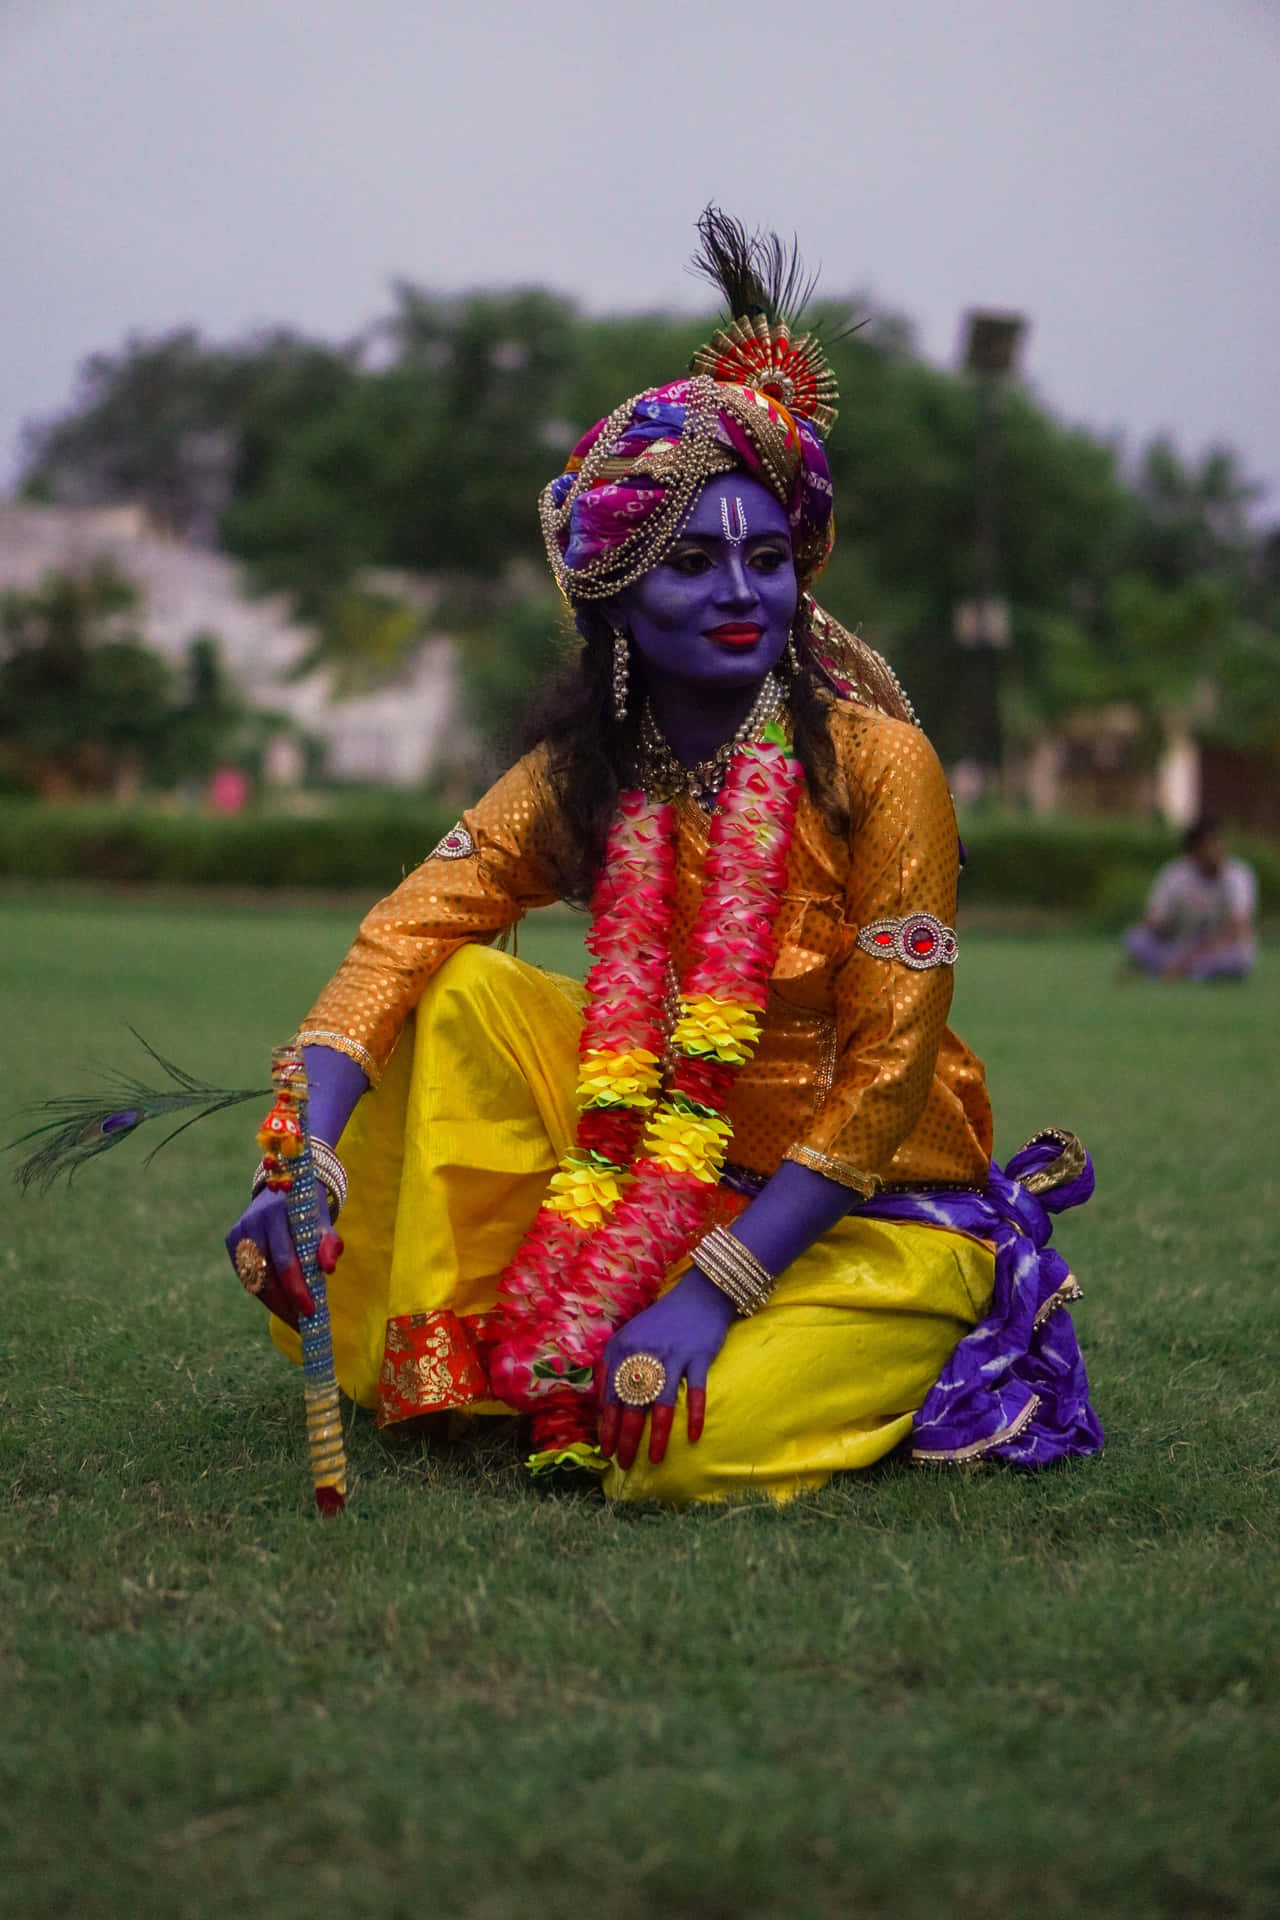 A Man In A Colorful Costume Sitting On The Grass